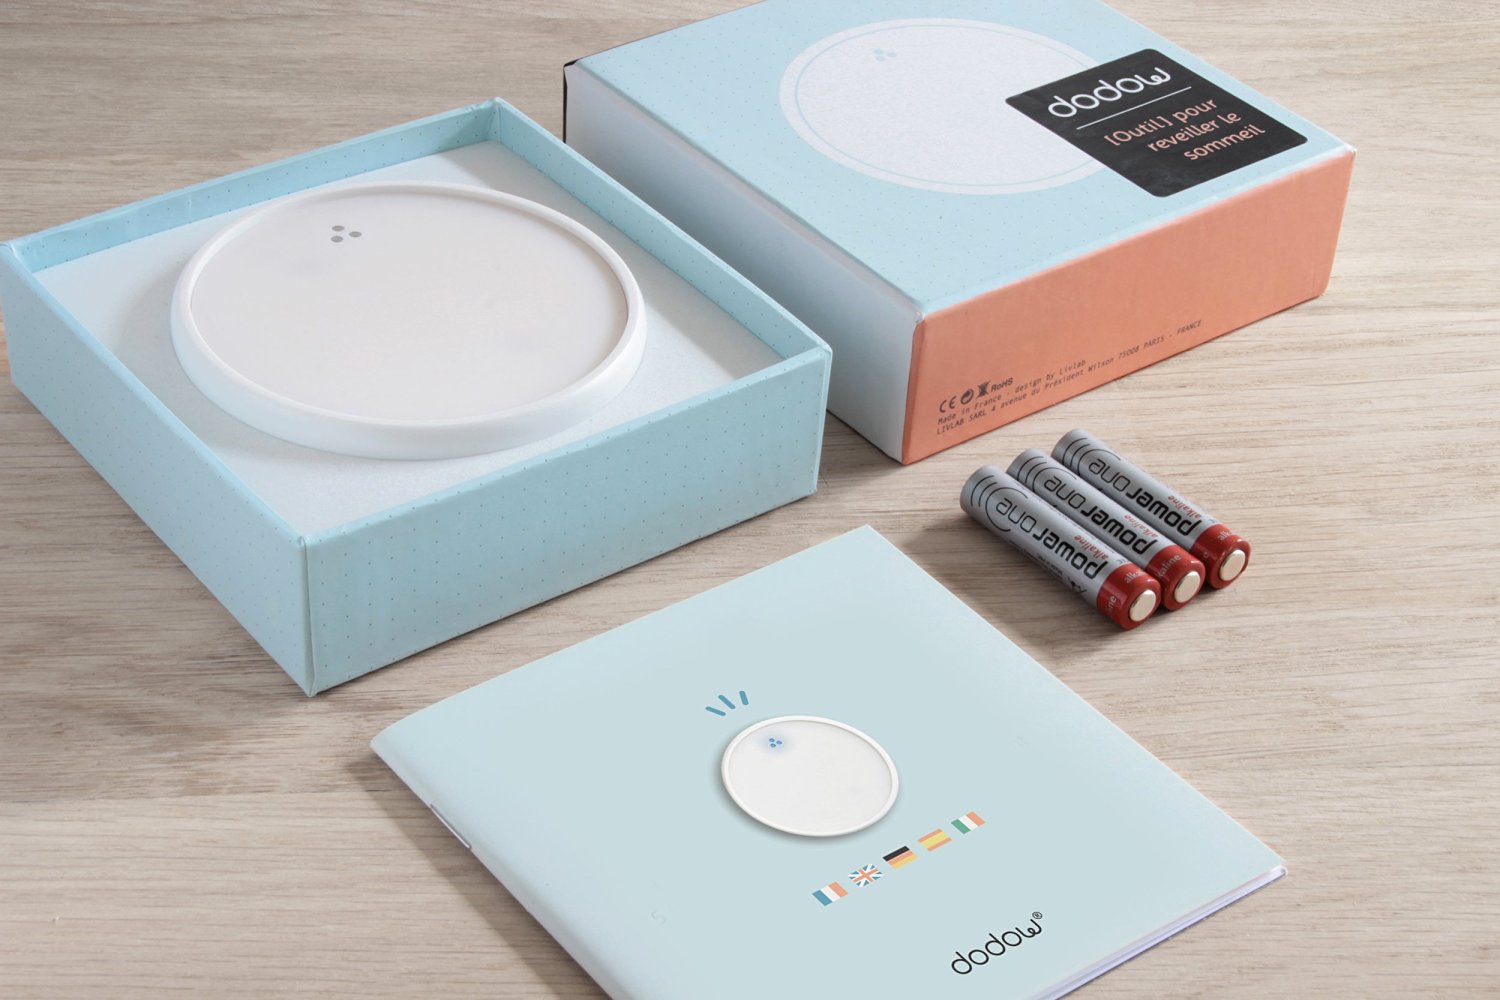 Dodow Review – Small but Perfectly Formed for Better Sleep